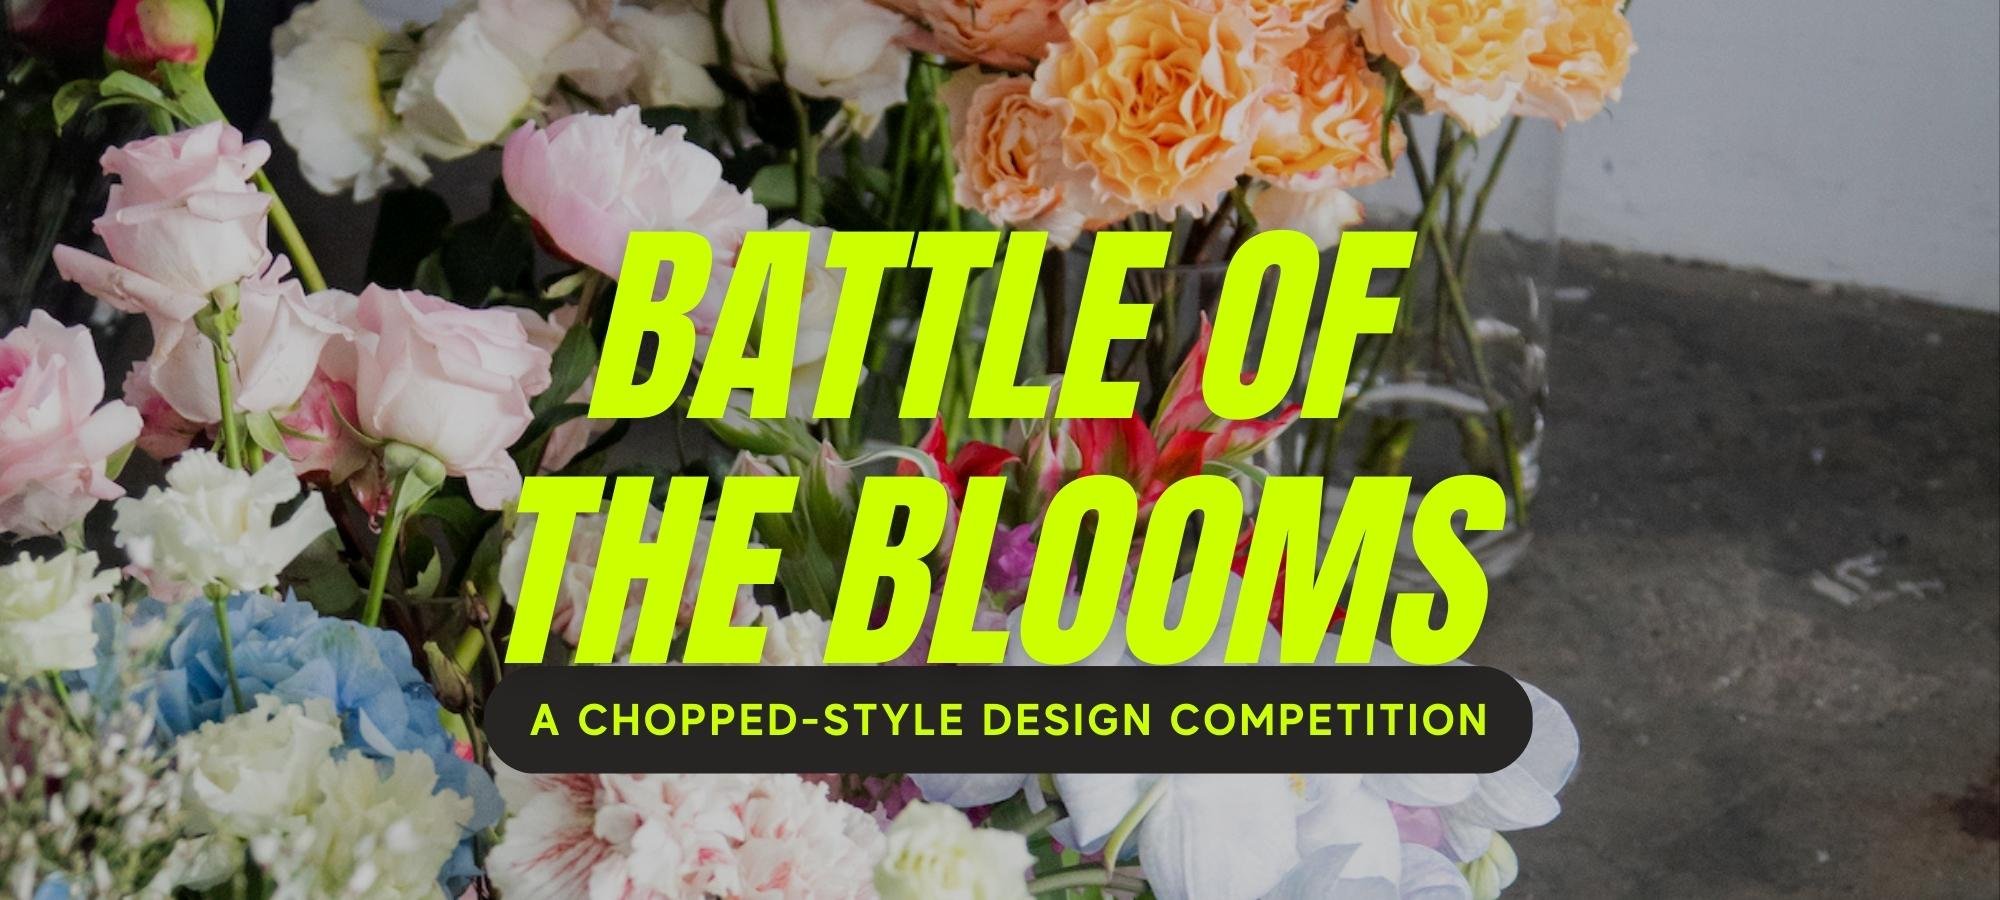 Landing Page Battle of the Blooms-1